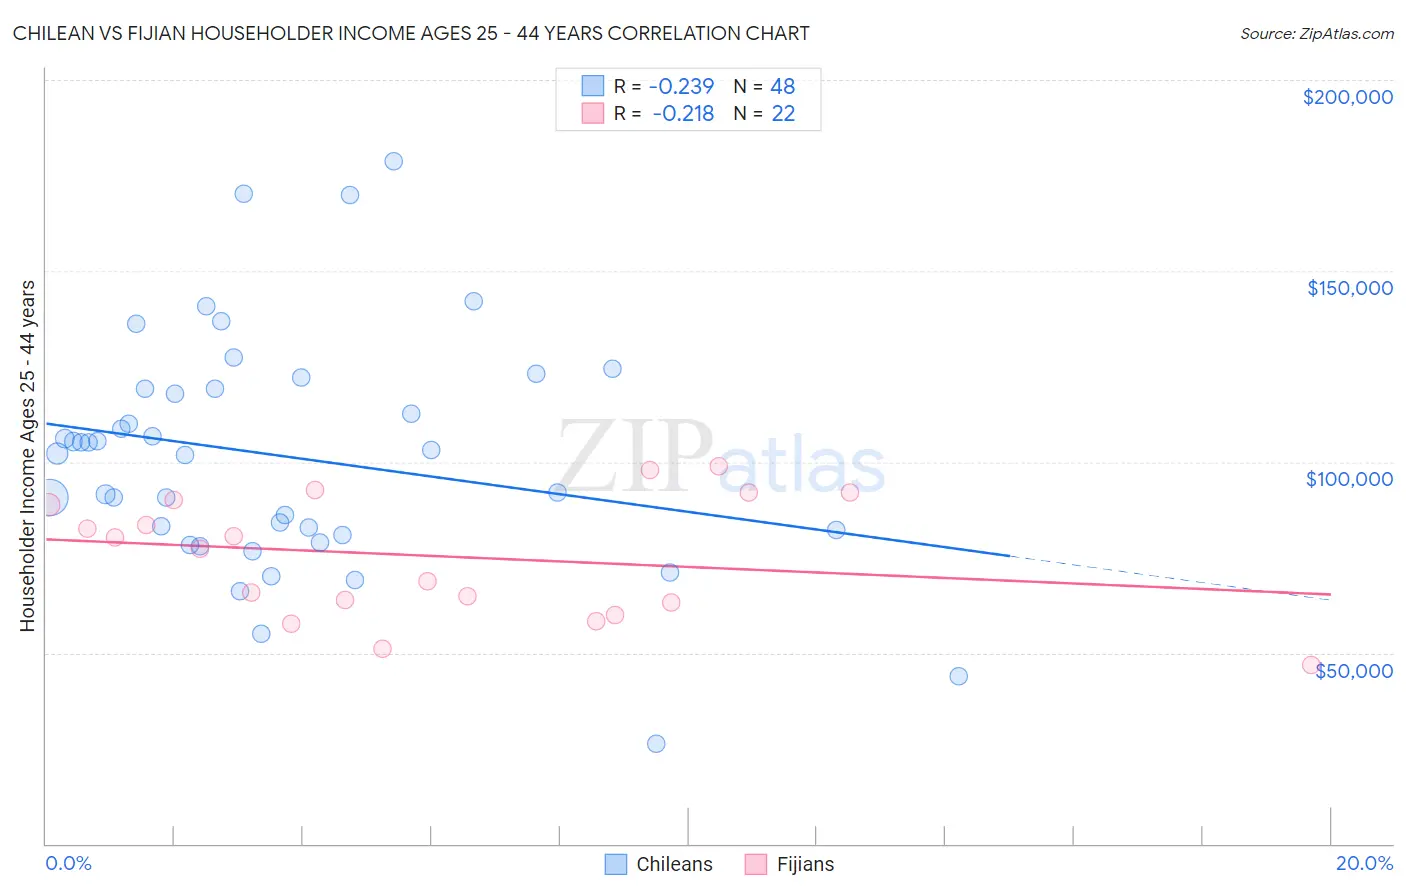 Chilean vs Fijian Householder Income Ages 25 - 44 years